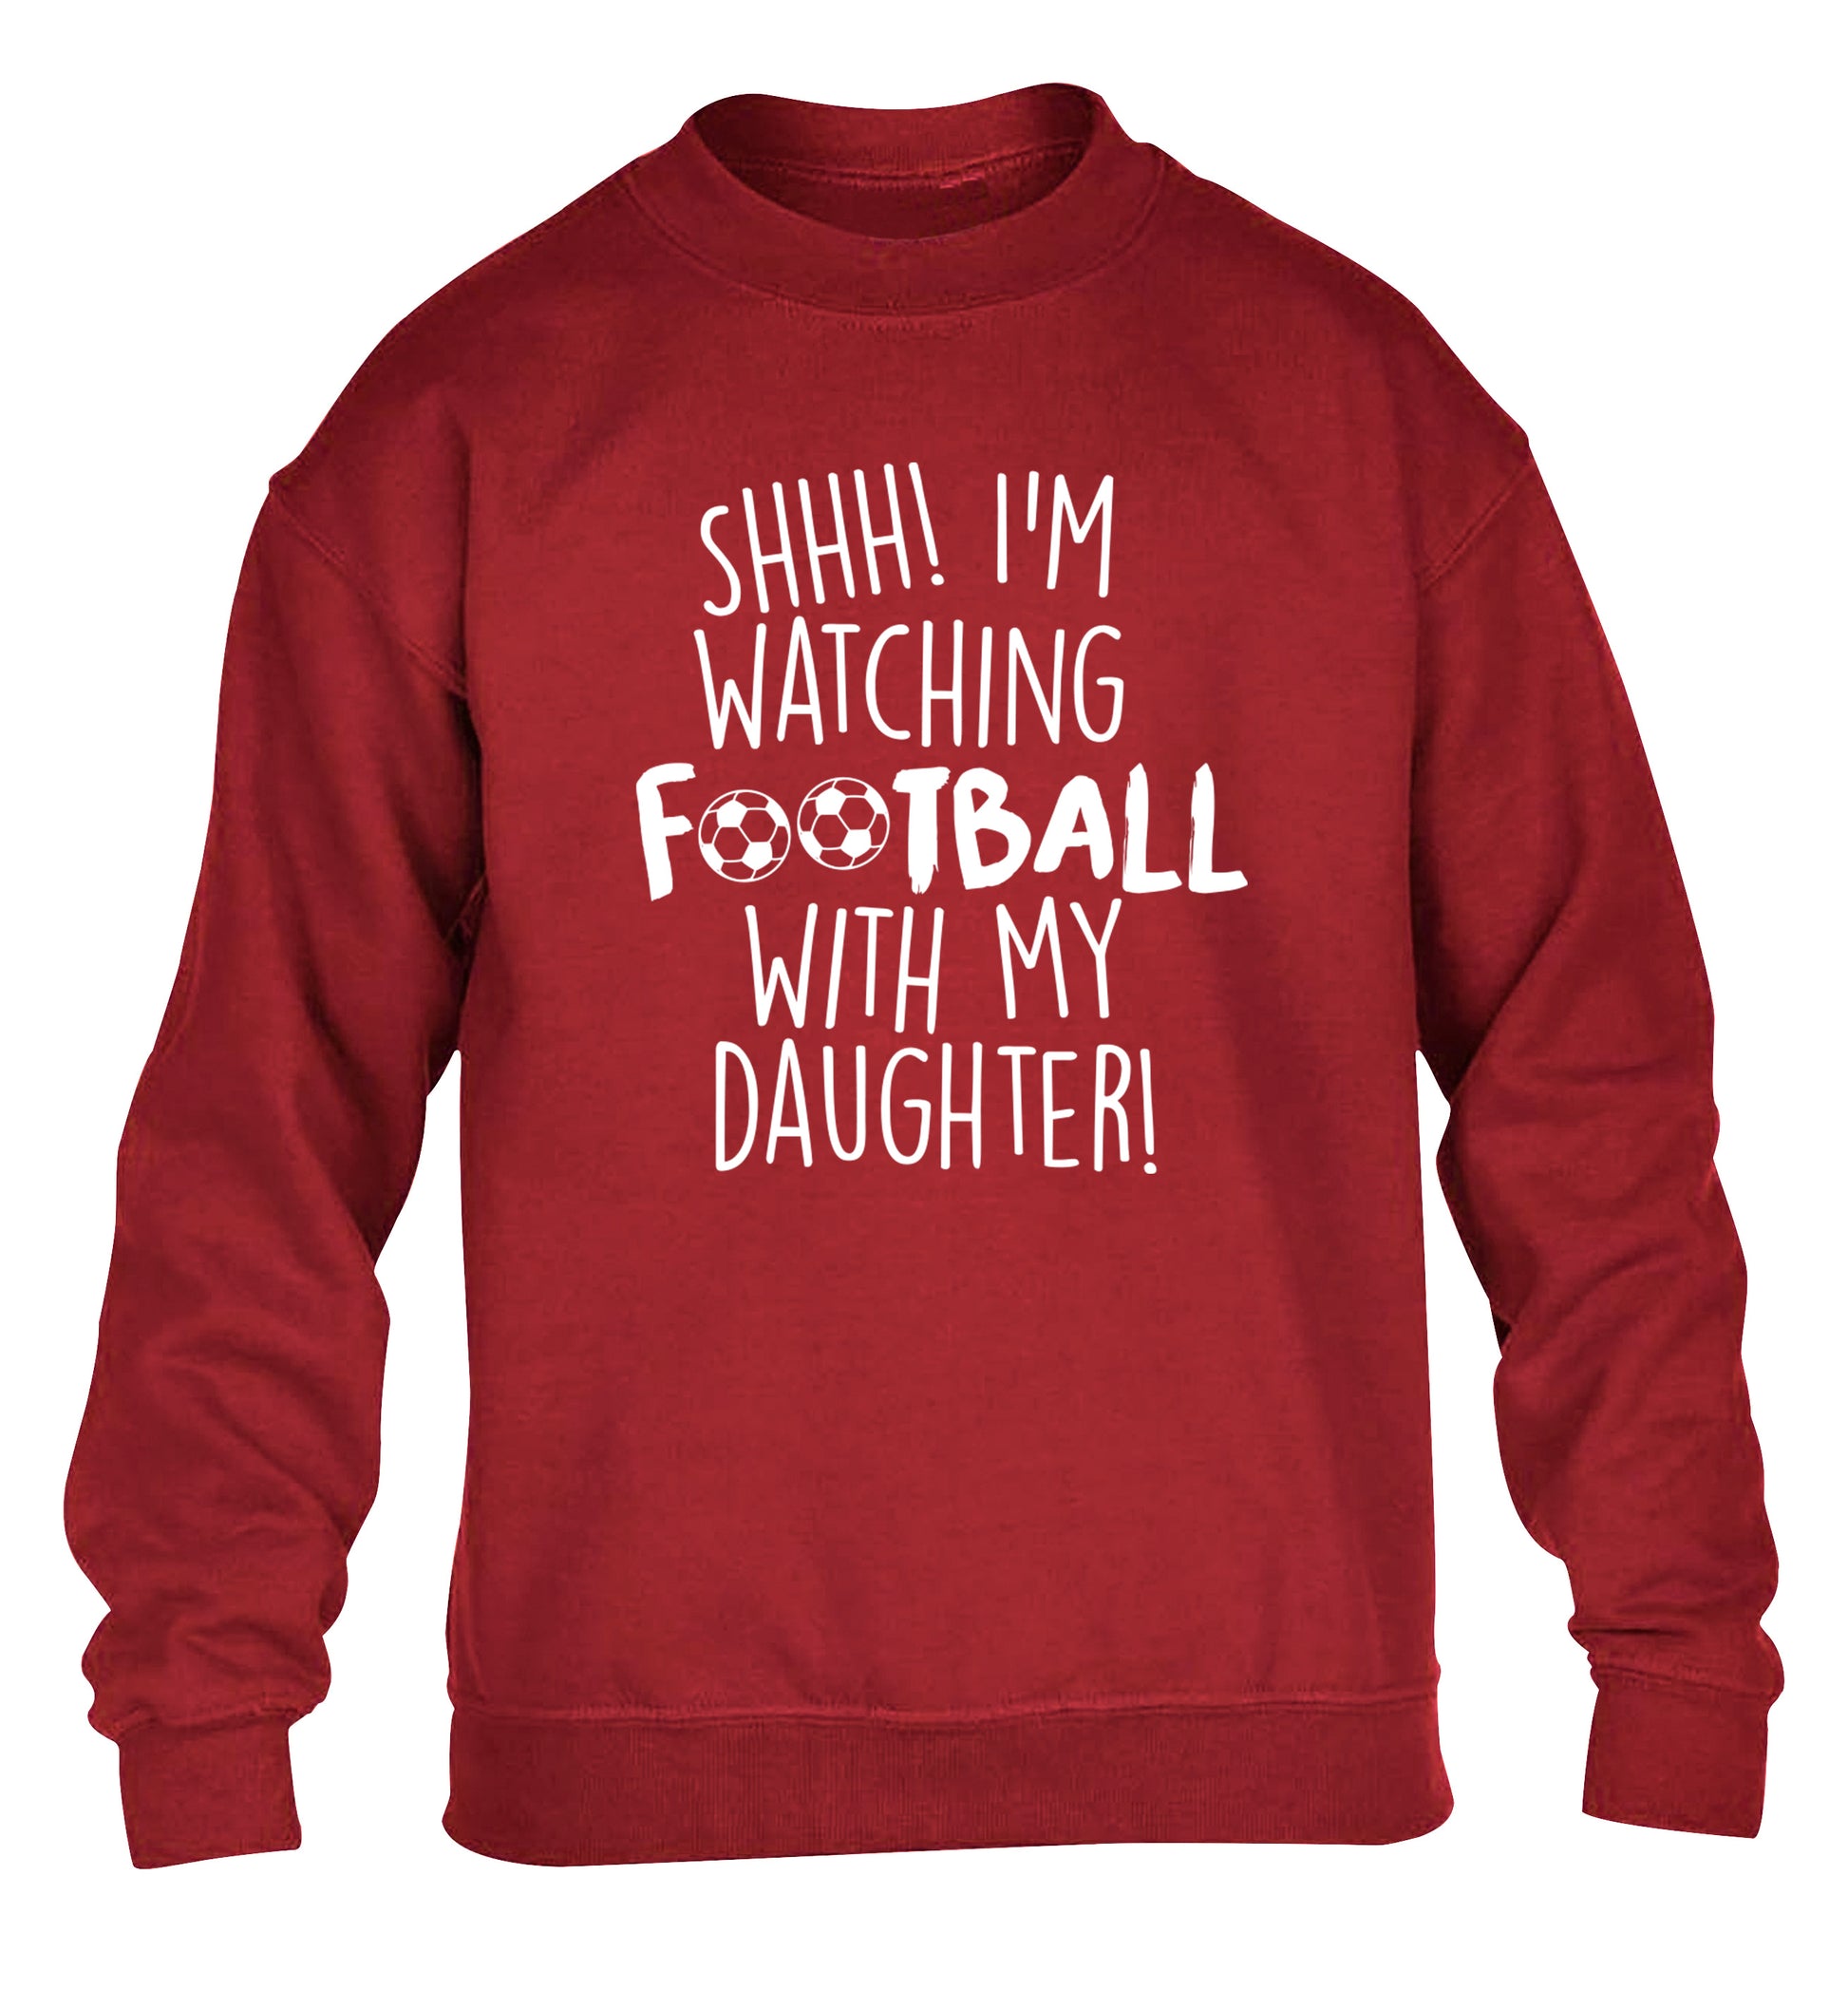 Shhh I'm watching football with my daughter children's grey sweater 12-14 Years